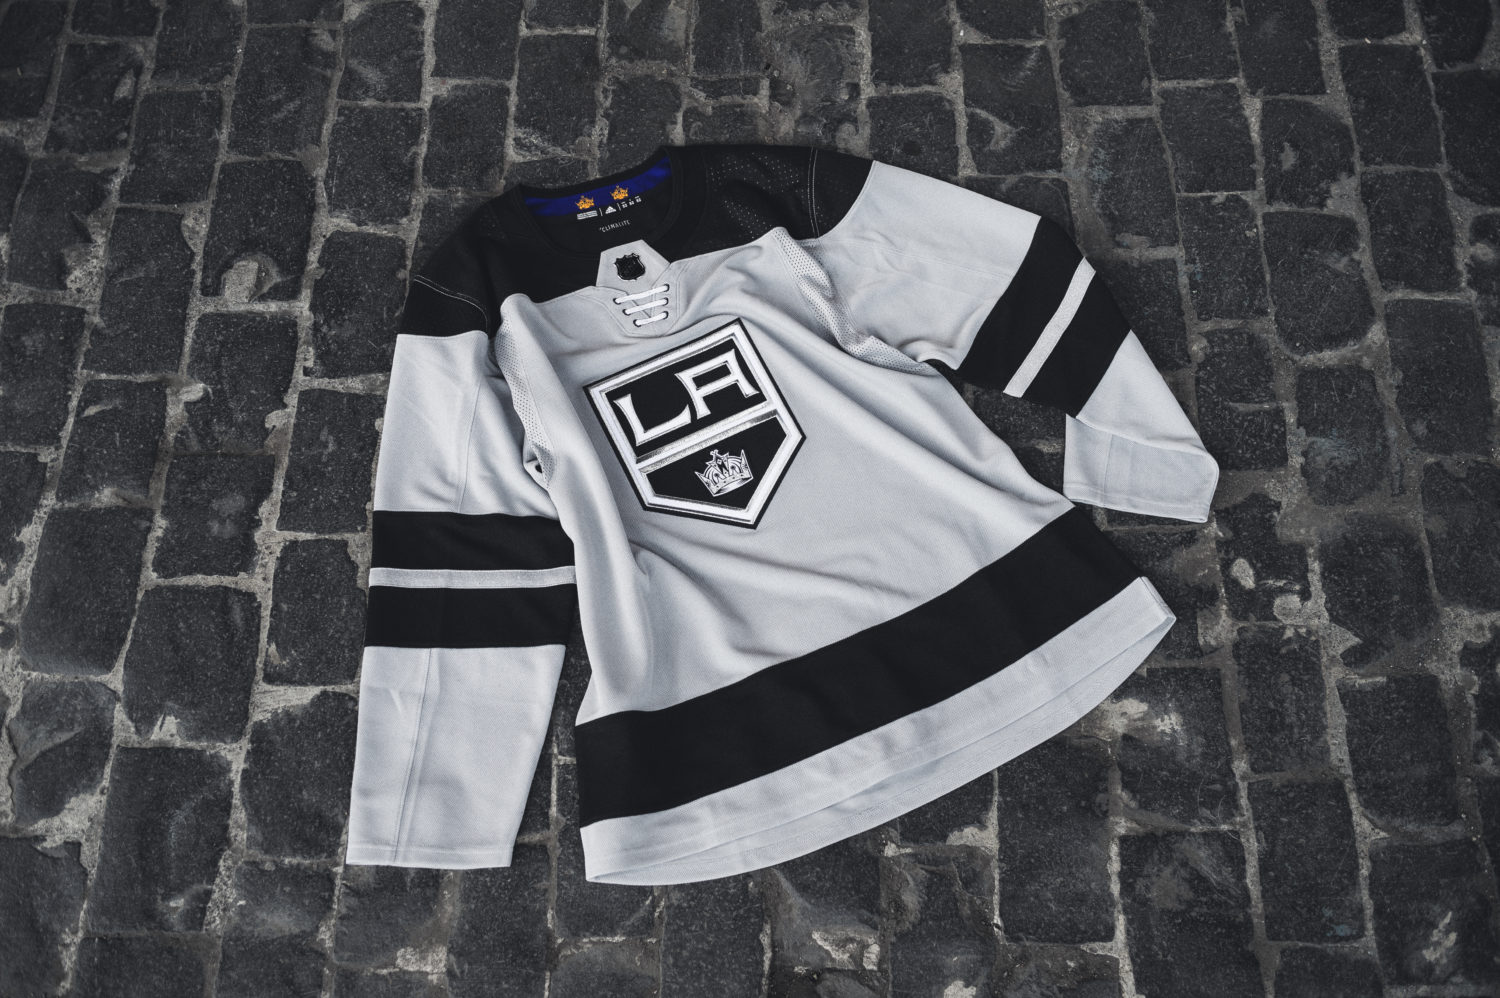  adidas Los Angeles Kings NHL Men's Climalite Authentic Team  Hockey Jersey : Sports & Outdoors